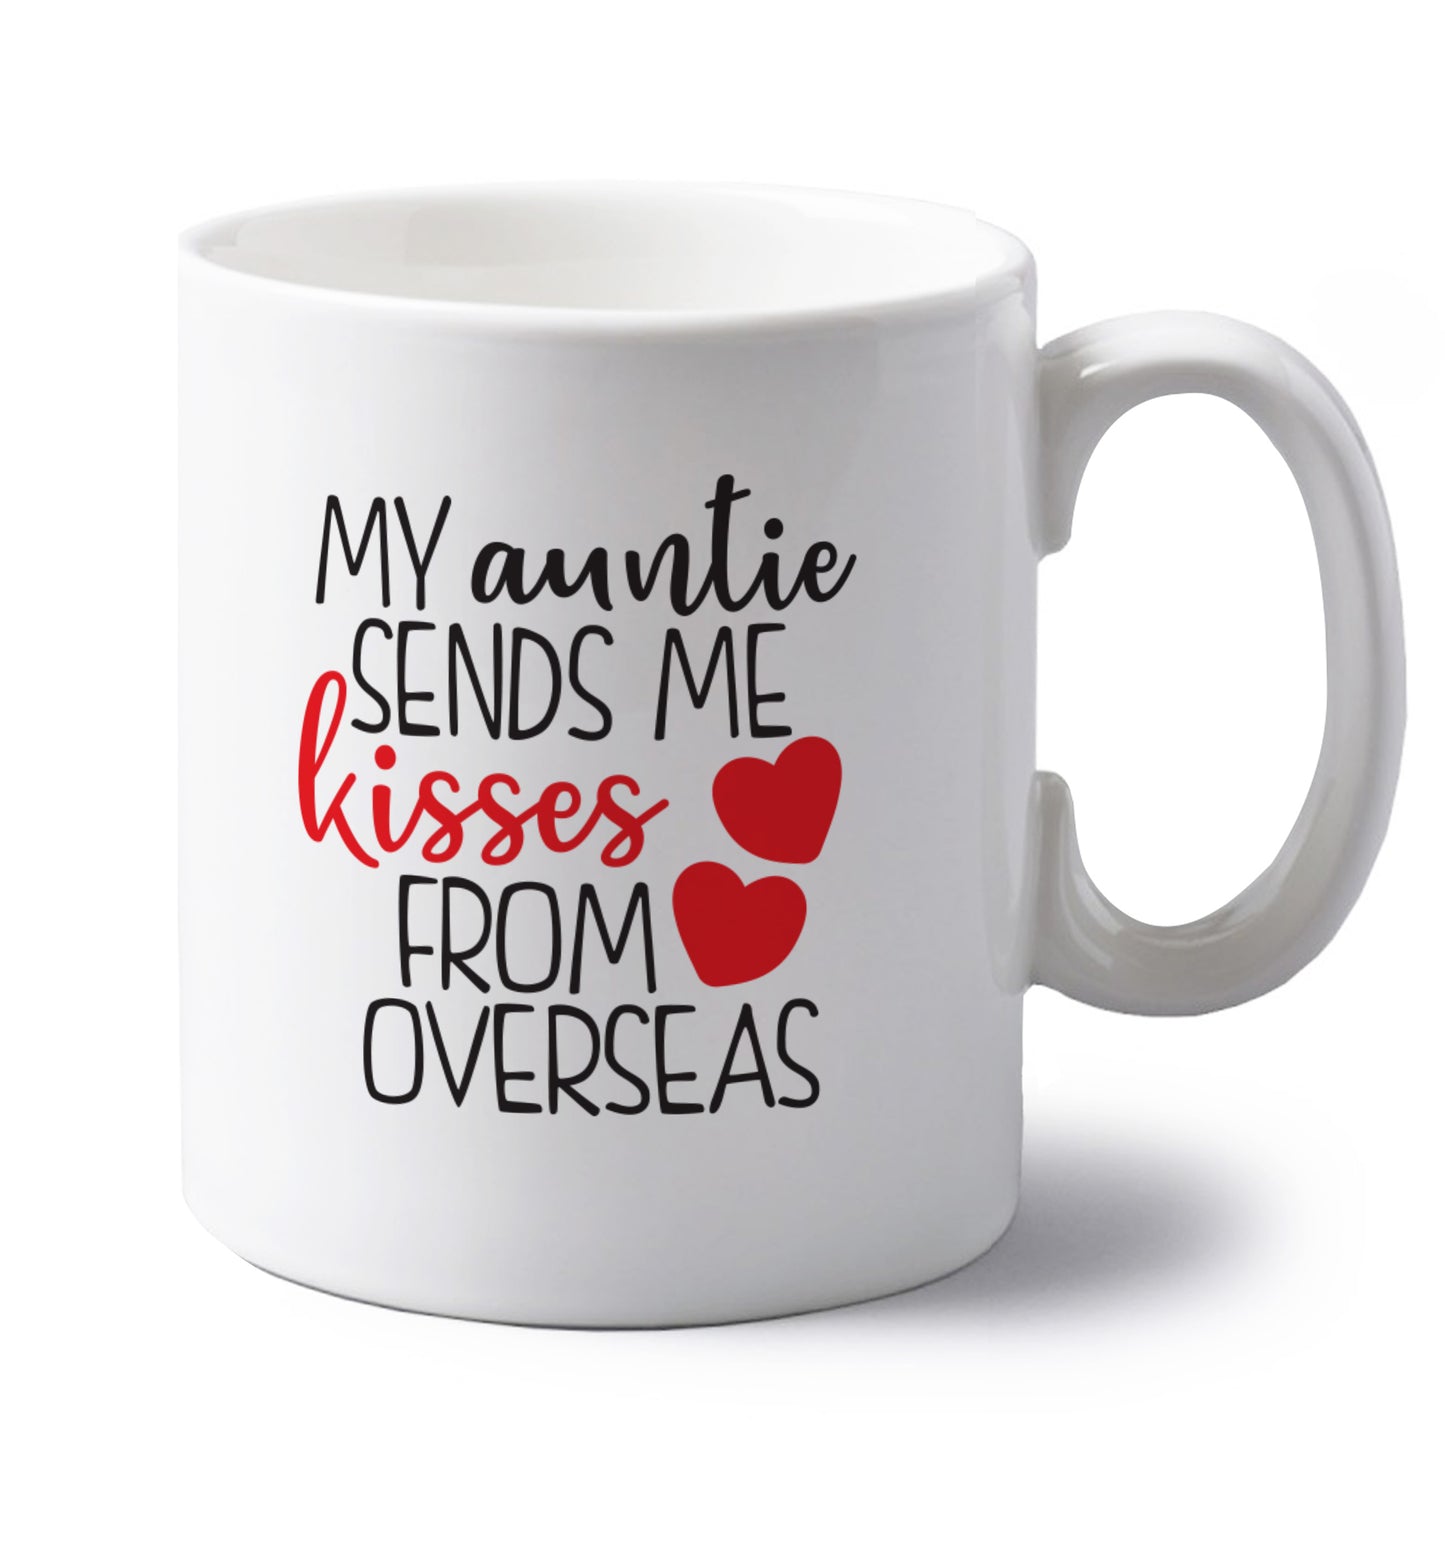 My auntie sends me kisses from overseas left handed white ceramic mug 